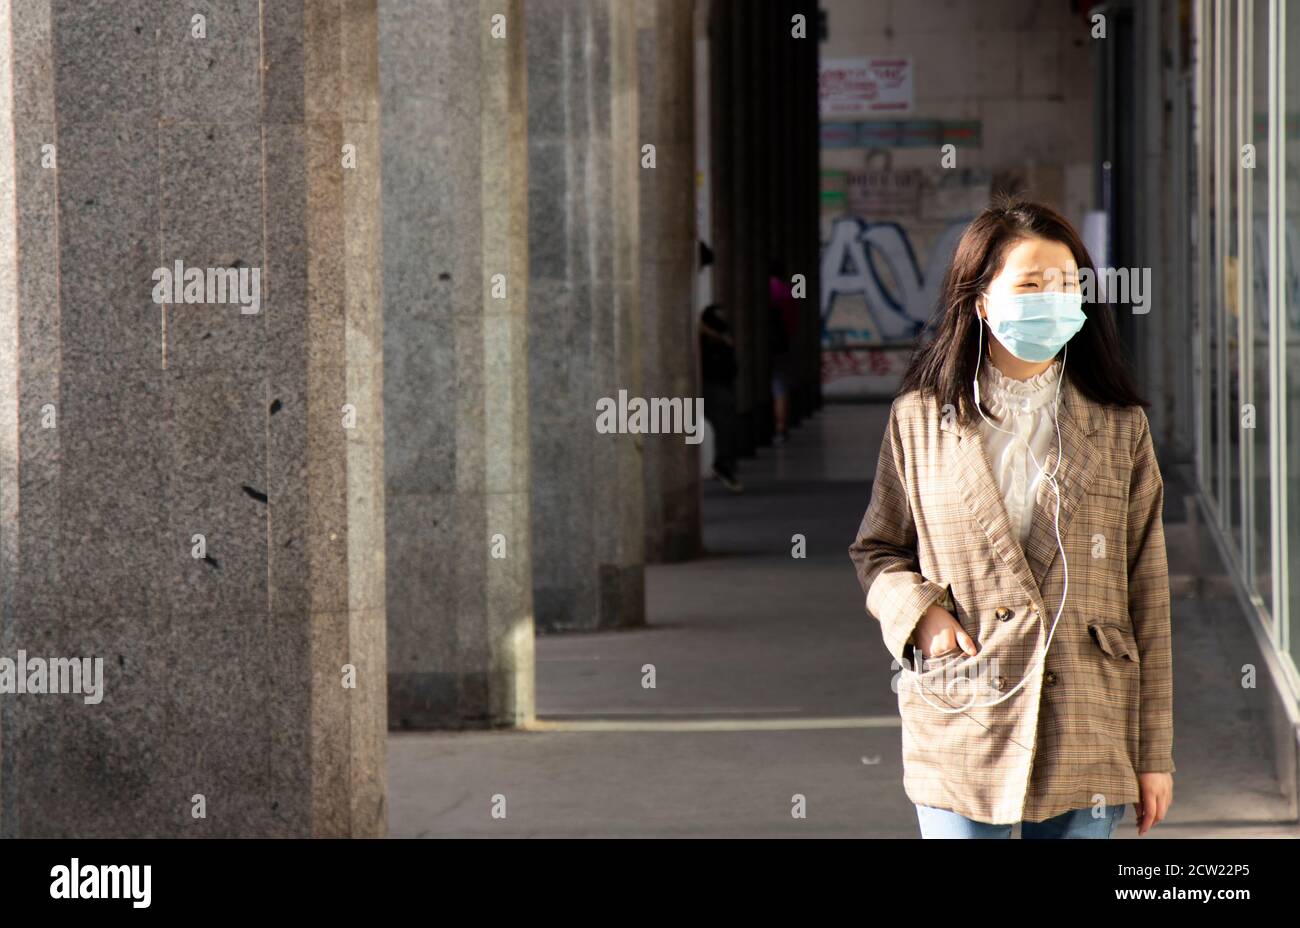 Belgrade, Serbia - September 26, 2020: Young Asian women wearing face surgical mask and earphones walking down the street with a hand in a pocket Stock Photo